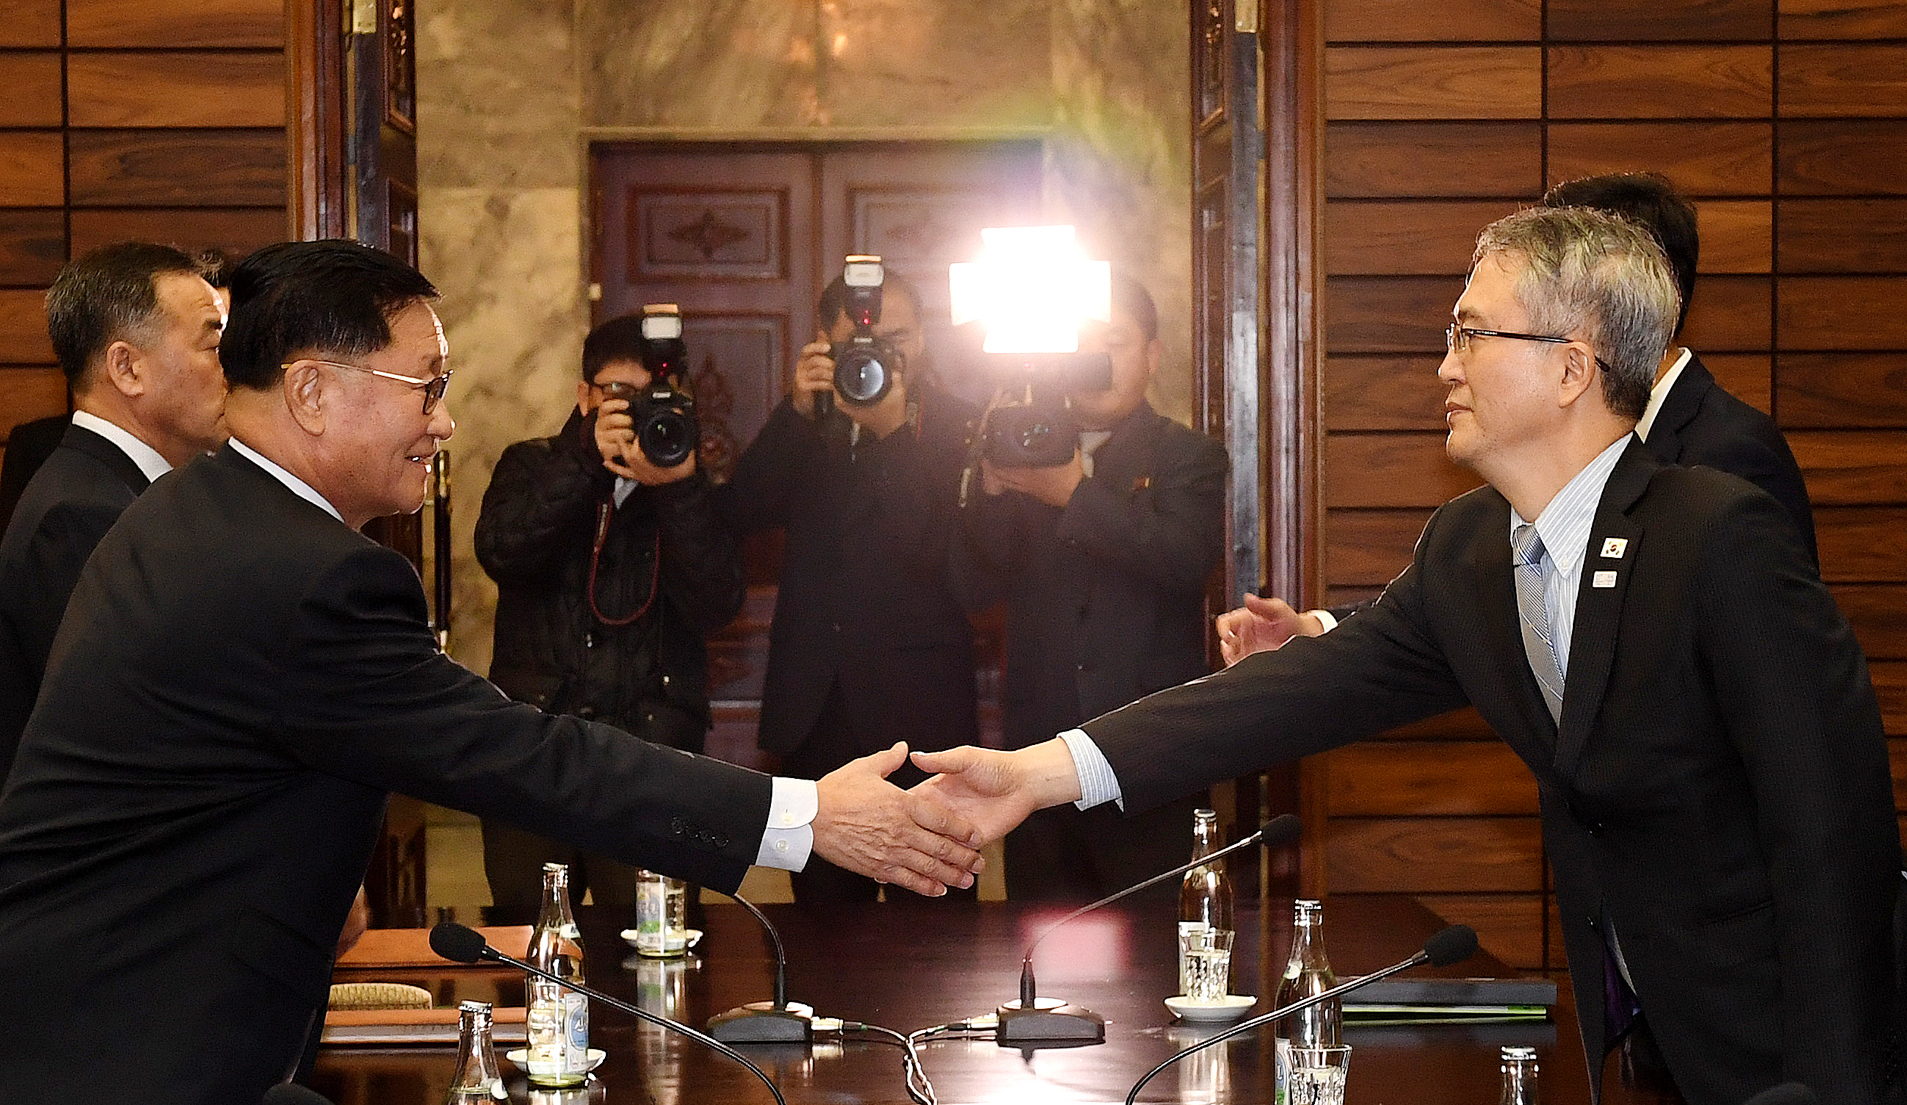 Kwon Hyok Bong, director general of the art-performance management bureau at North Korea's culture ministry, and Lee Woo-sung, a senior official at South Korea's Ministry of Culture, Sports and Tourism, shake hands during a meeting at the Tongil Gak building in the village of Panmunjom in the Demilitarized Zone in North Korea, on Jan. 15, 2018. (KPPA/Pool/Bloomberg/Getty Images)